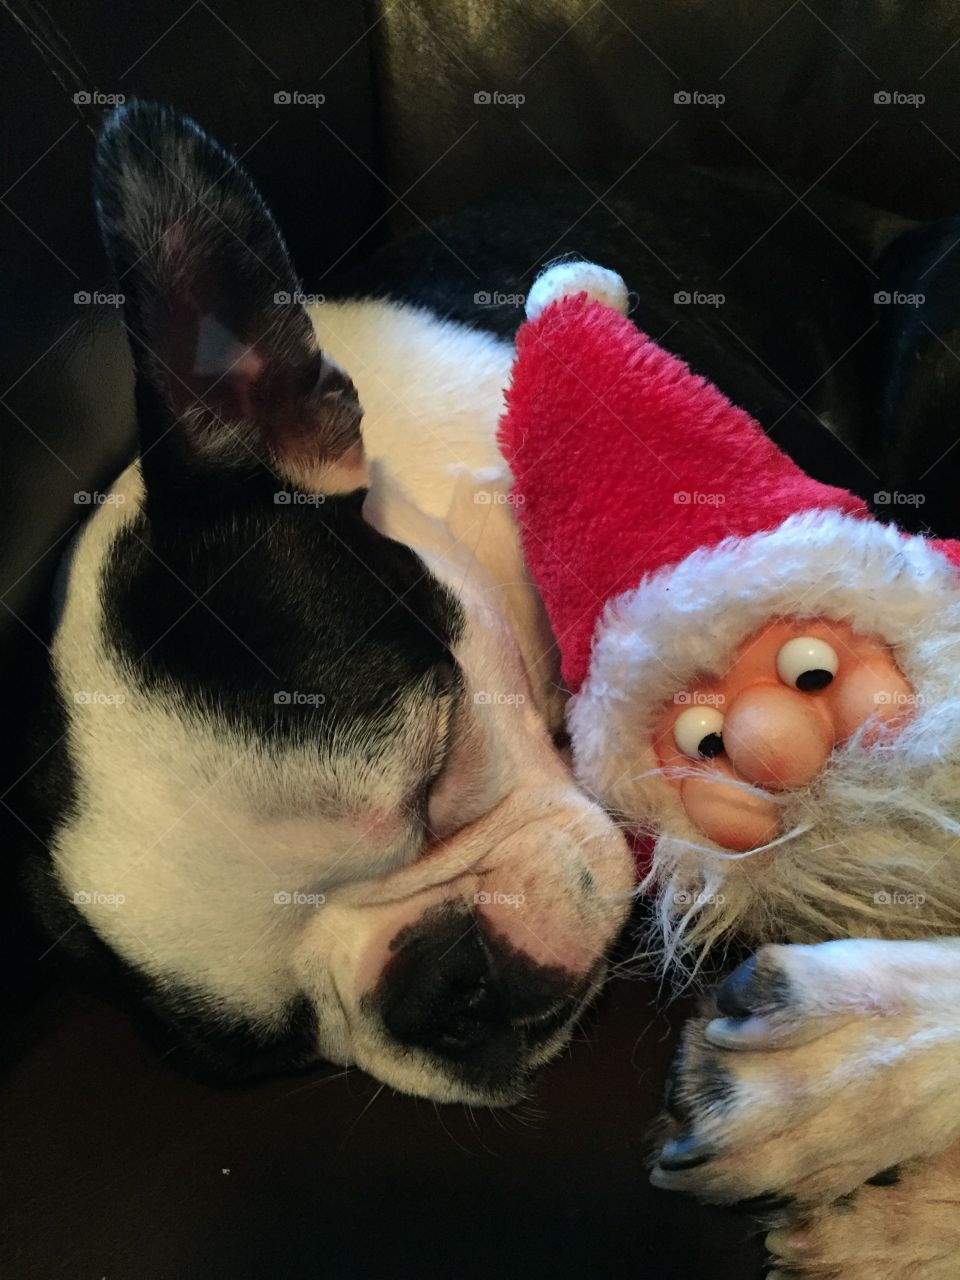 Black & white Boston terrier pup is sleeping now after running around chasing the little Santa toy i was tossing for her. Exhausting wpork being a puppy!